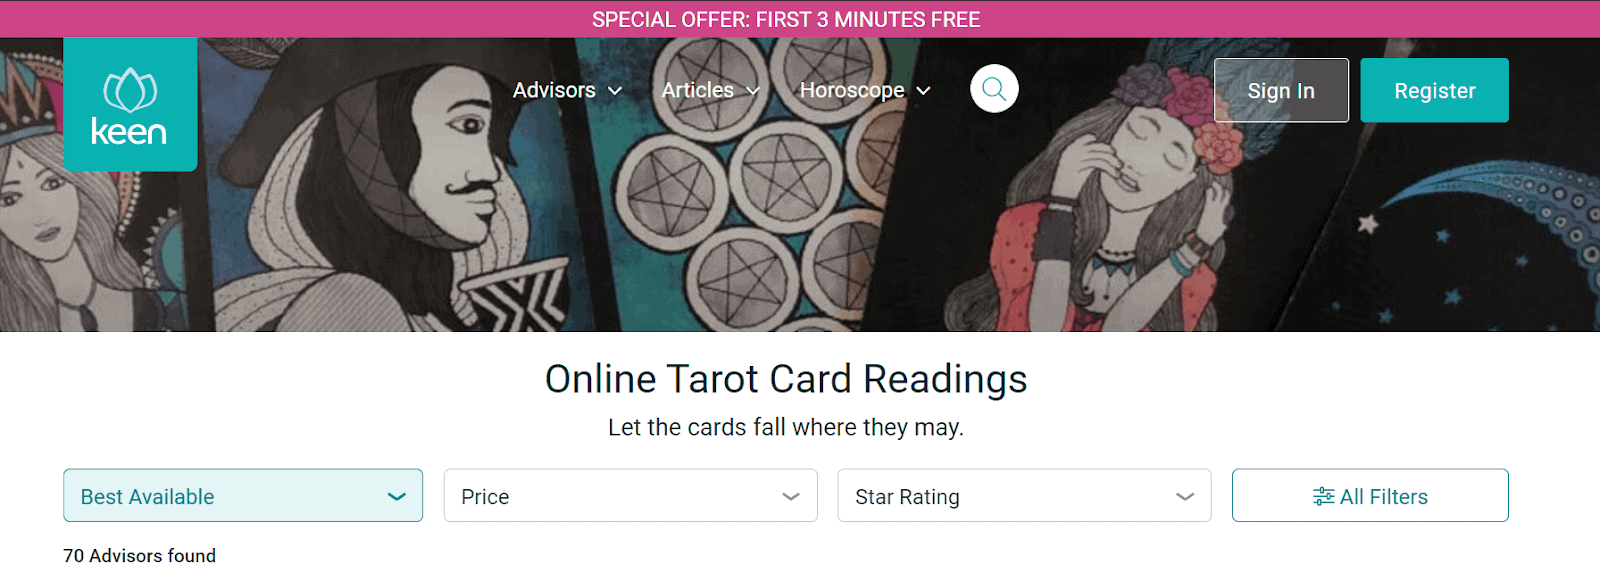 Getting Assistance from a Tarot Reader